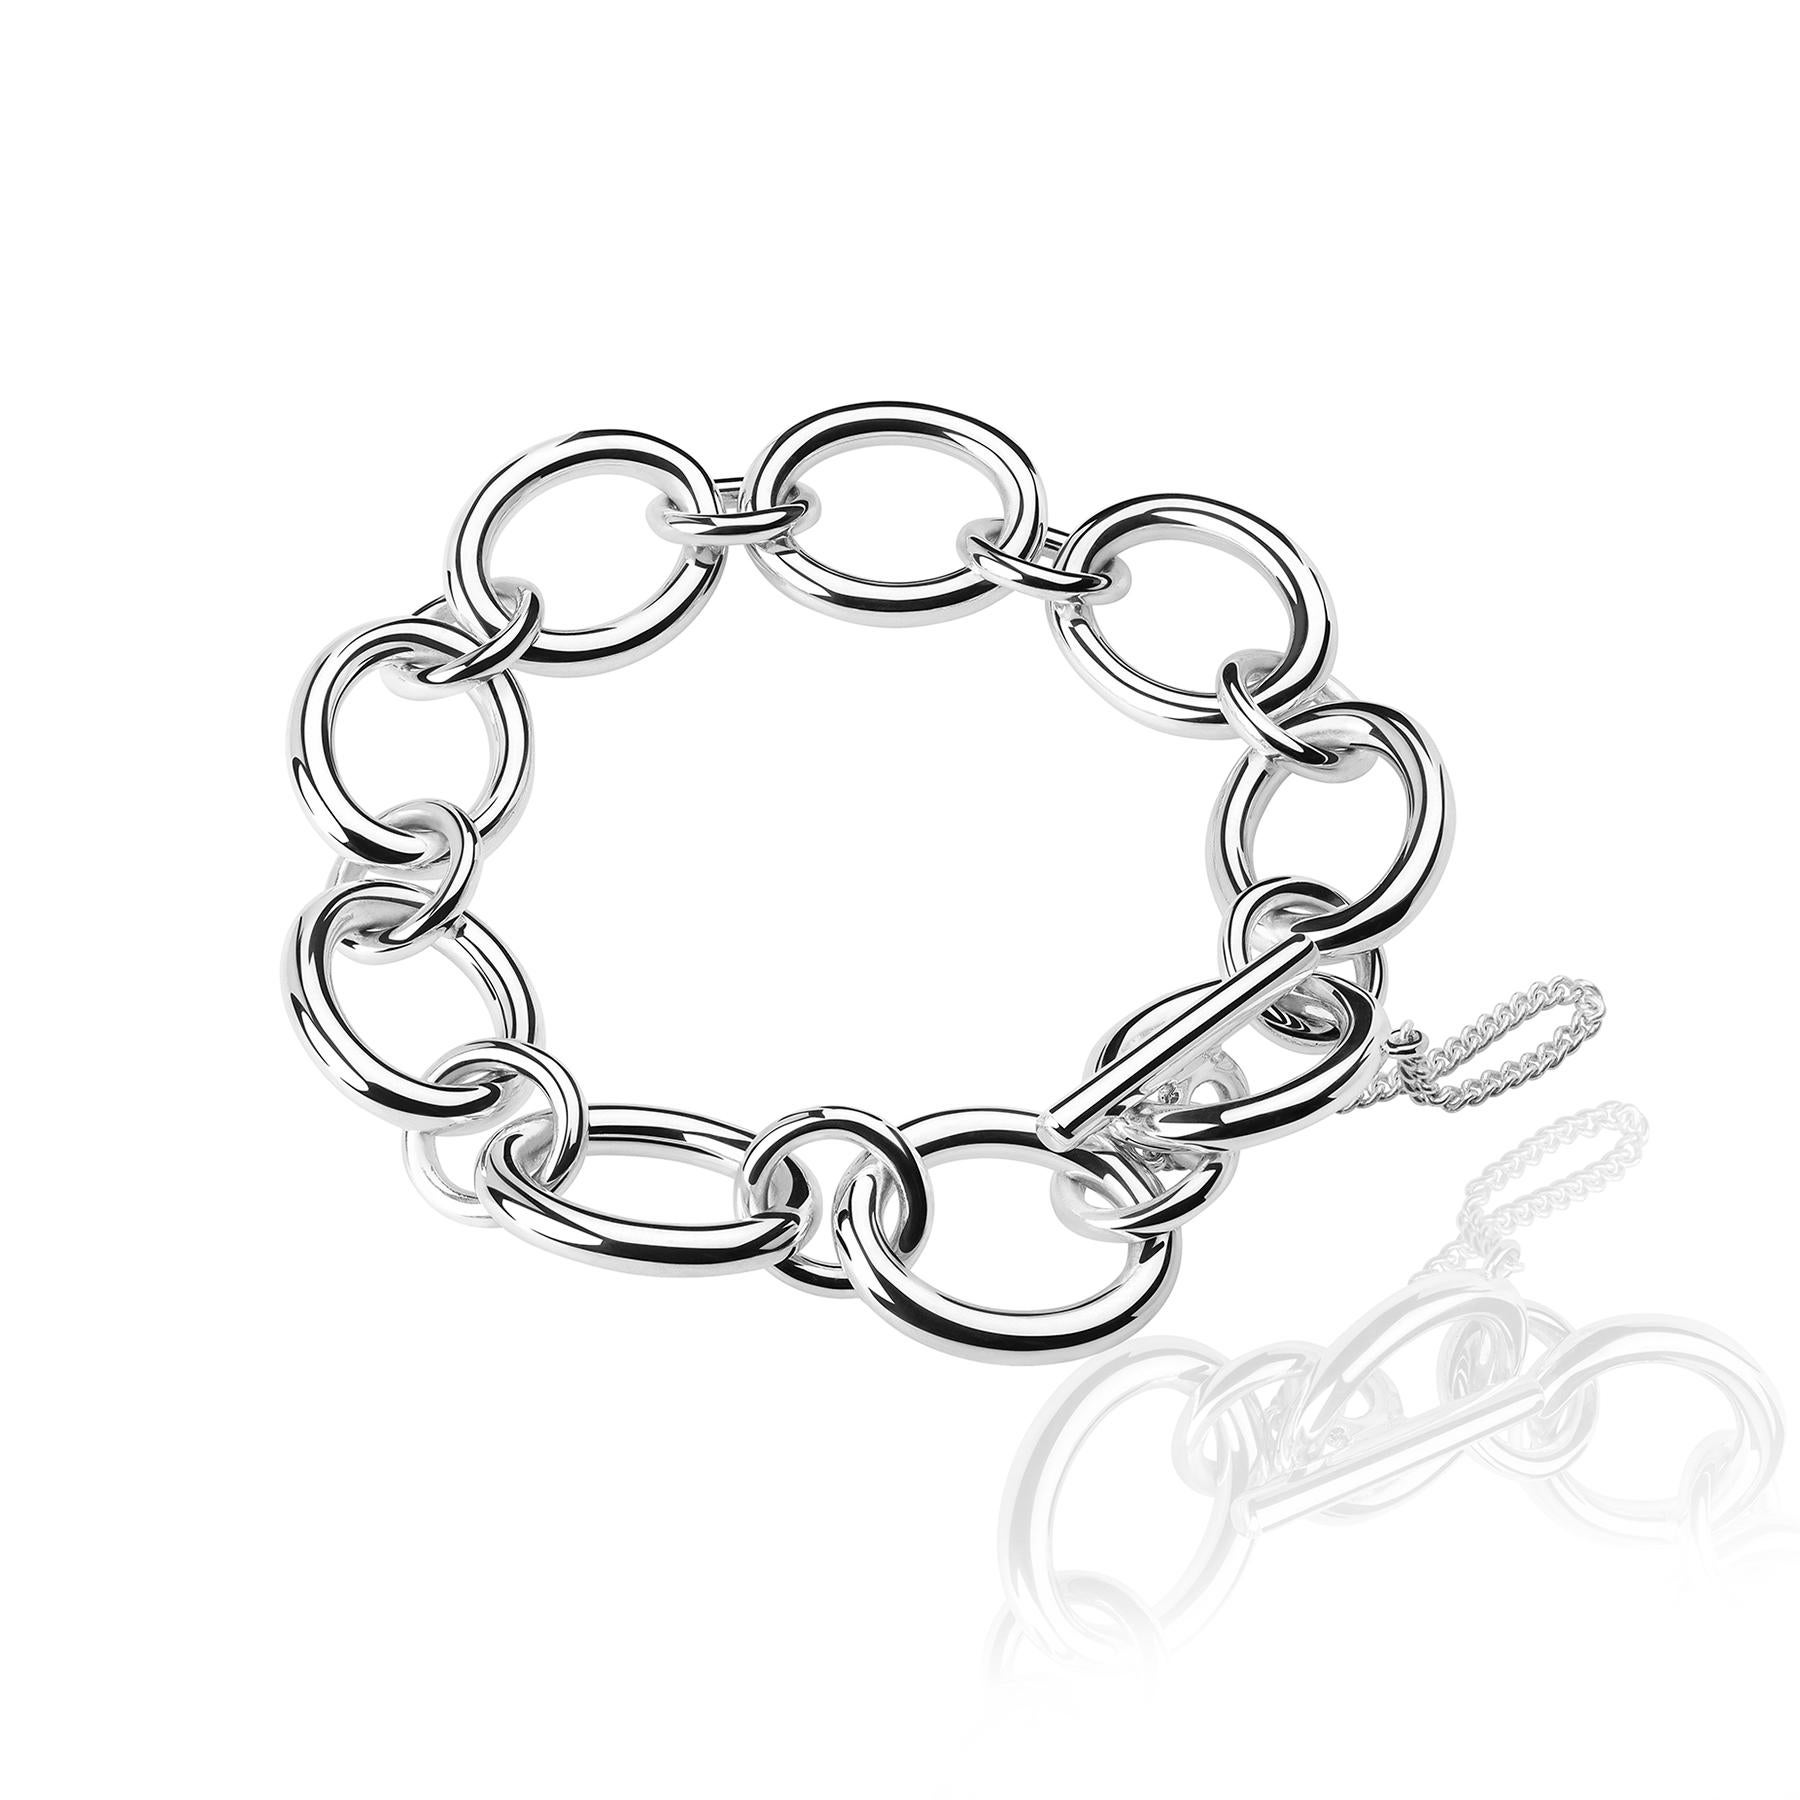 The Rocío Bracelet is made in sterling silver. The chain that makes it up is made up of a series of round links, creating a sublime play of geometry and permection. Each of the links is handcrafted to achieve a jewel of unique mastery and beauty. At